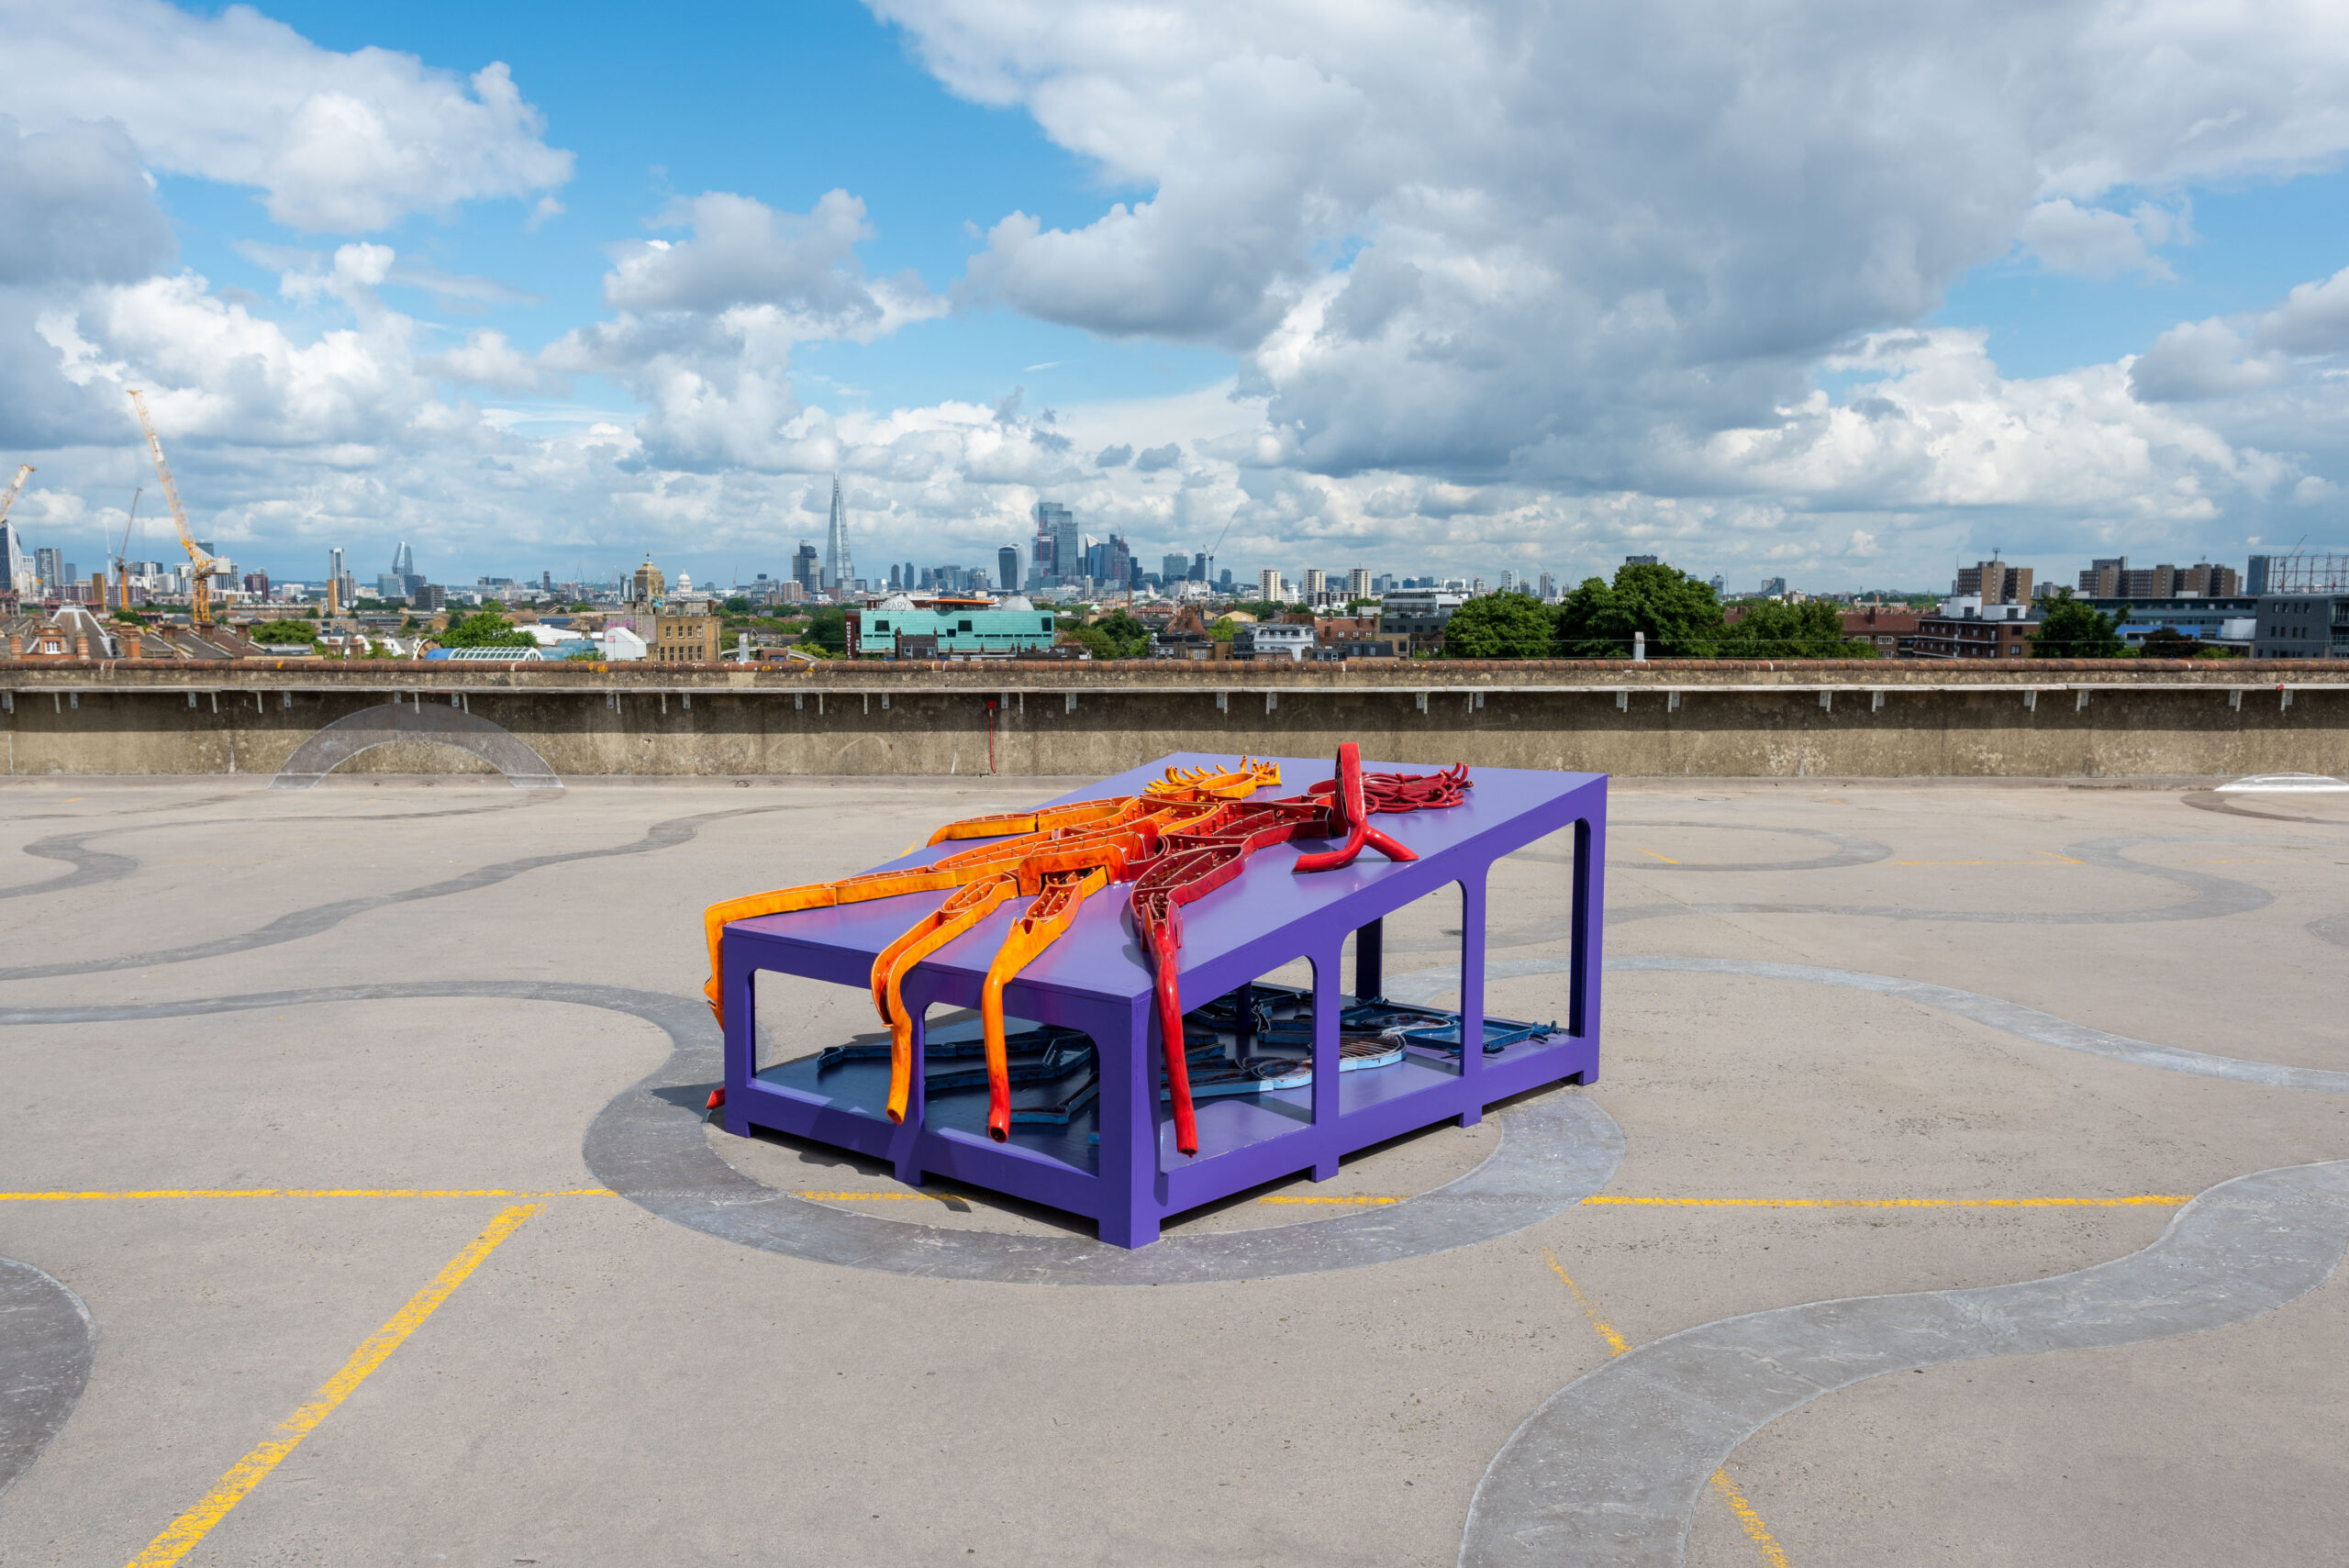 ID: a bright purple structure in the shape of a large tomb with two levels and a row of hollow arches on either side is placed on a concrete rooftop with the London skyline and blue skies in the background. On the top level of the structure two figures are made out of red and orange ceramic, overlapping anatomies and colours. On the bottom level, a pair of skeletons are made from sections of blue ceramic, mirroring the relationship of the top two figures.